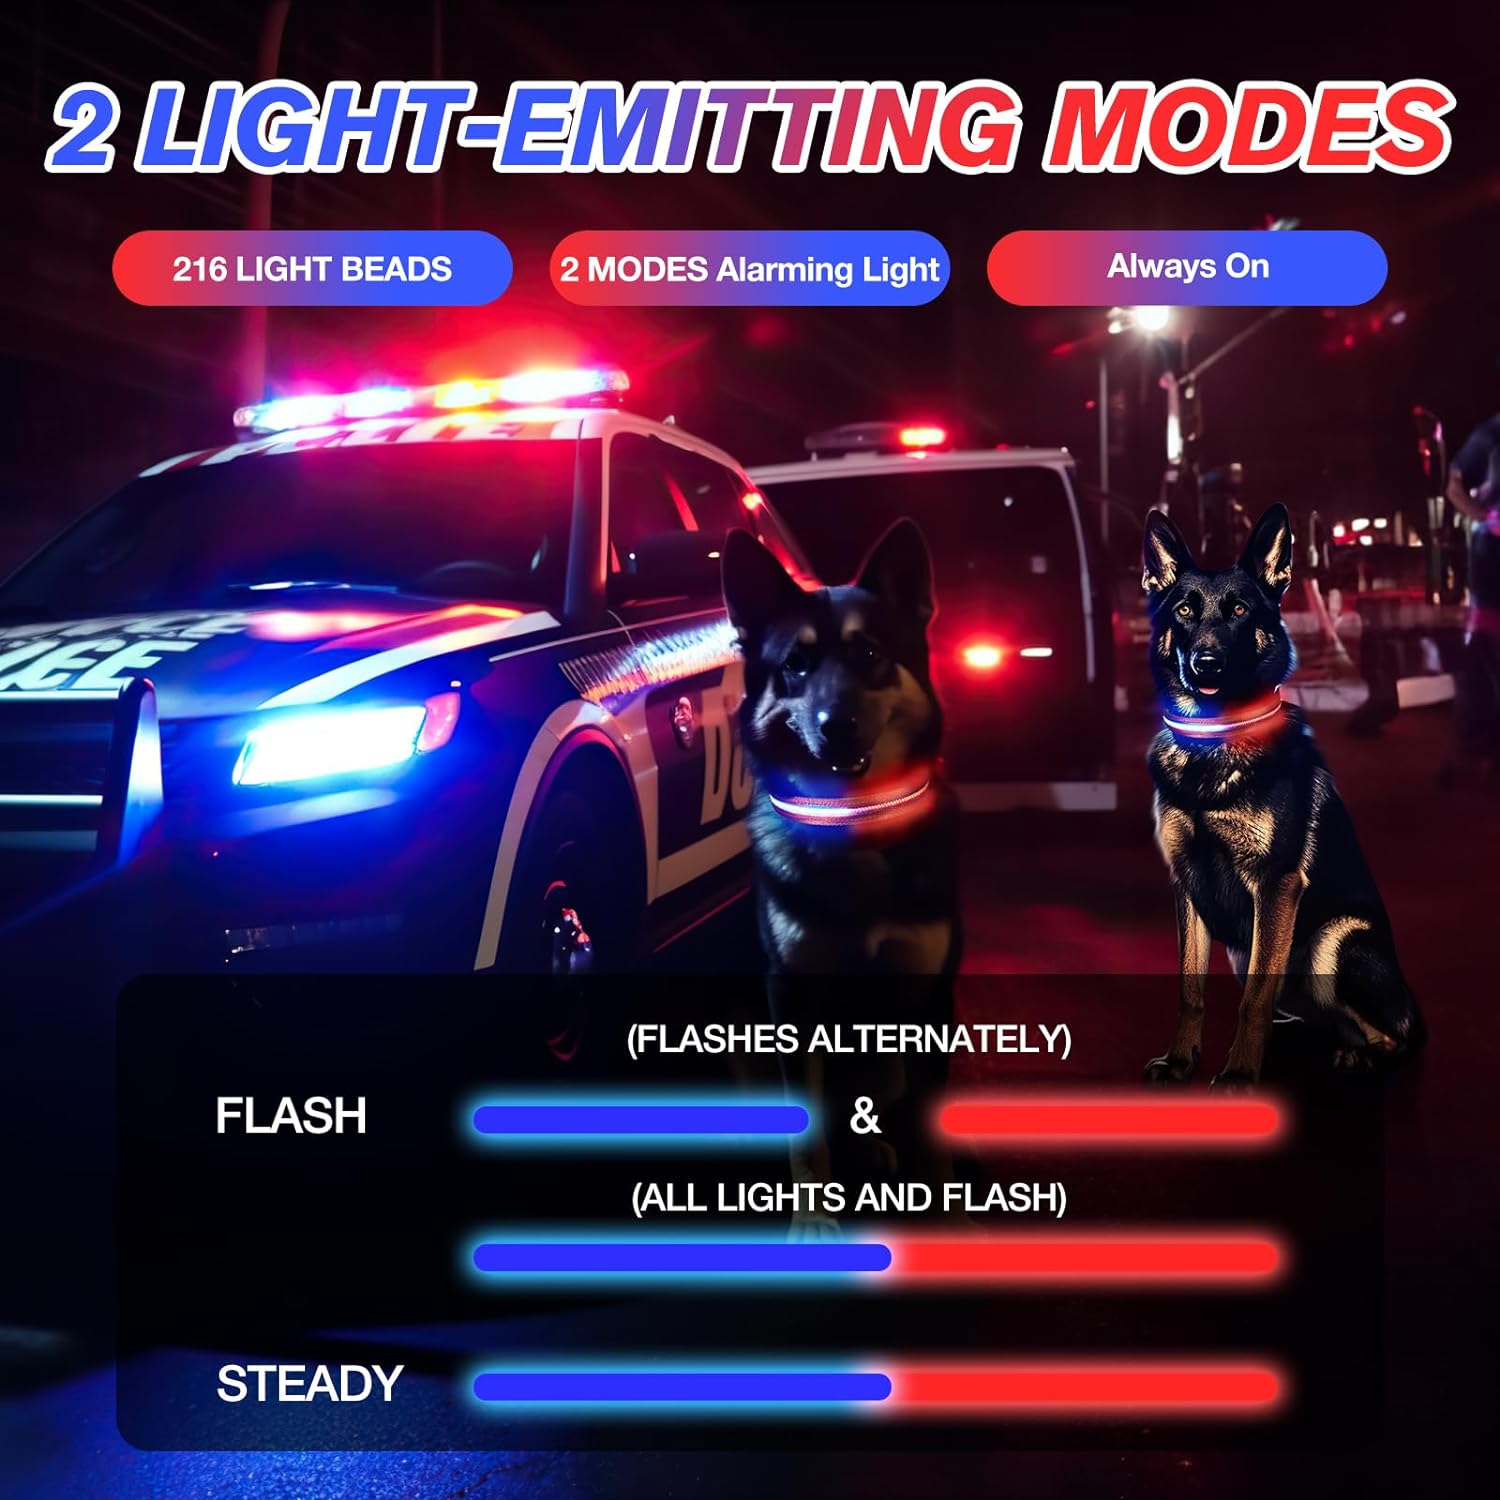 Jewyow Light Up Dog Collar 1600FT of Visibility Super Light Glowing Collar Type-C Rechargeable IPX7 Waterproof Led Dog Collars for Night Walking (Red M)